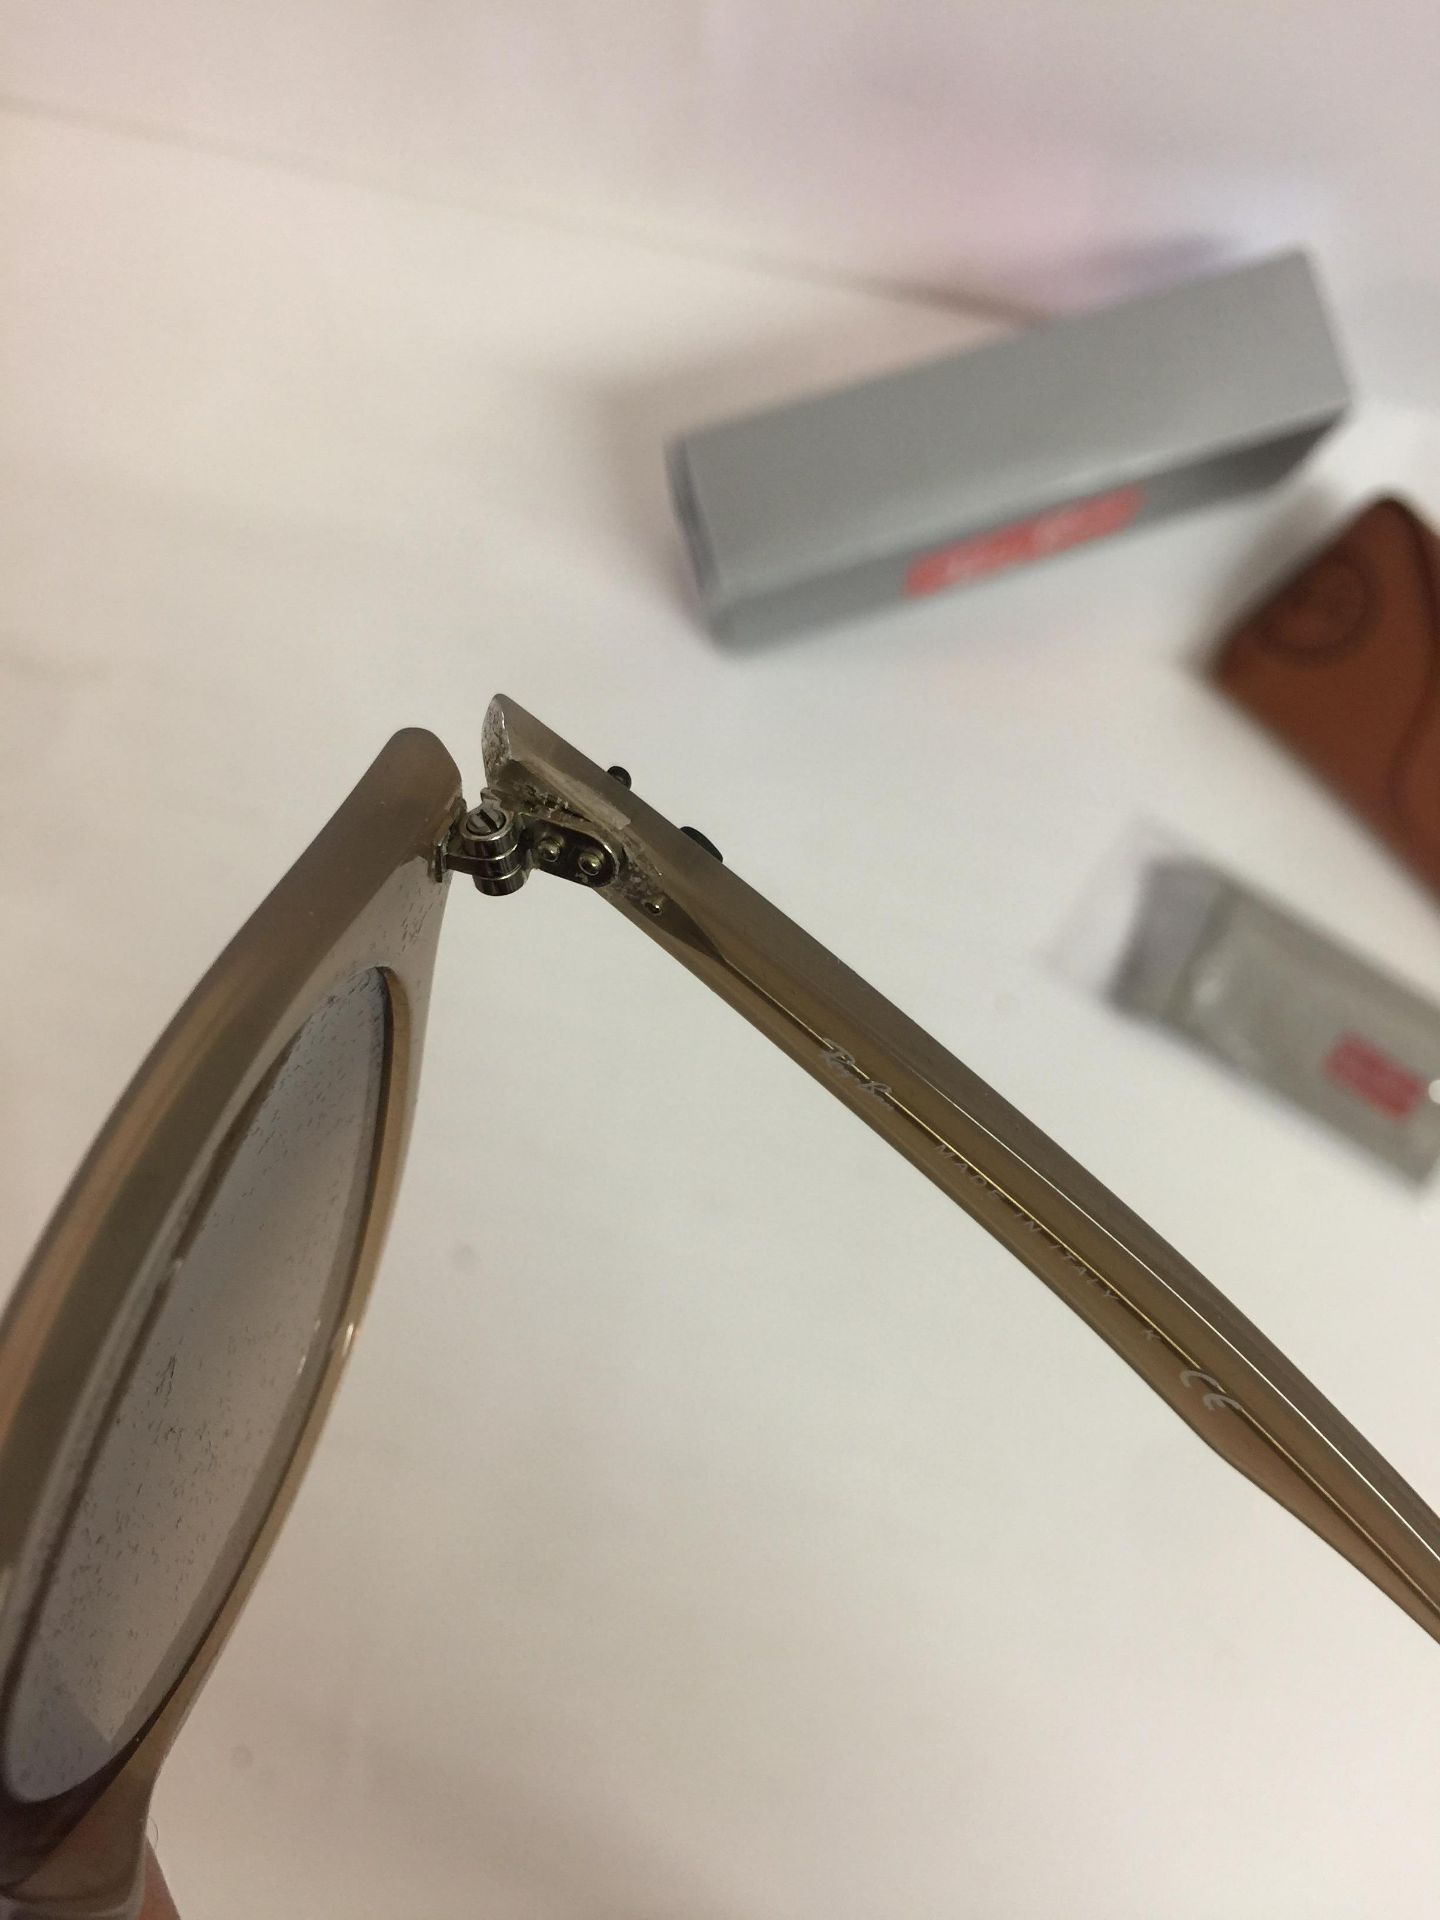 Ray-Ban 2180 SOLE Unisex Sunglasses (broken arm, see image) - Image 2 of 2